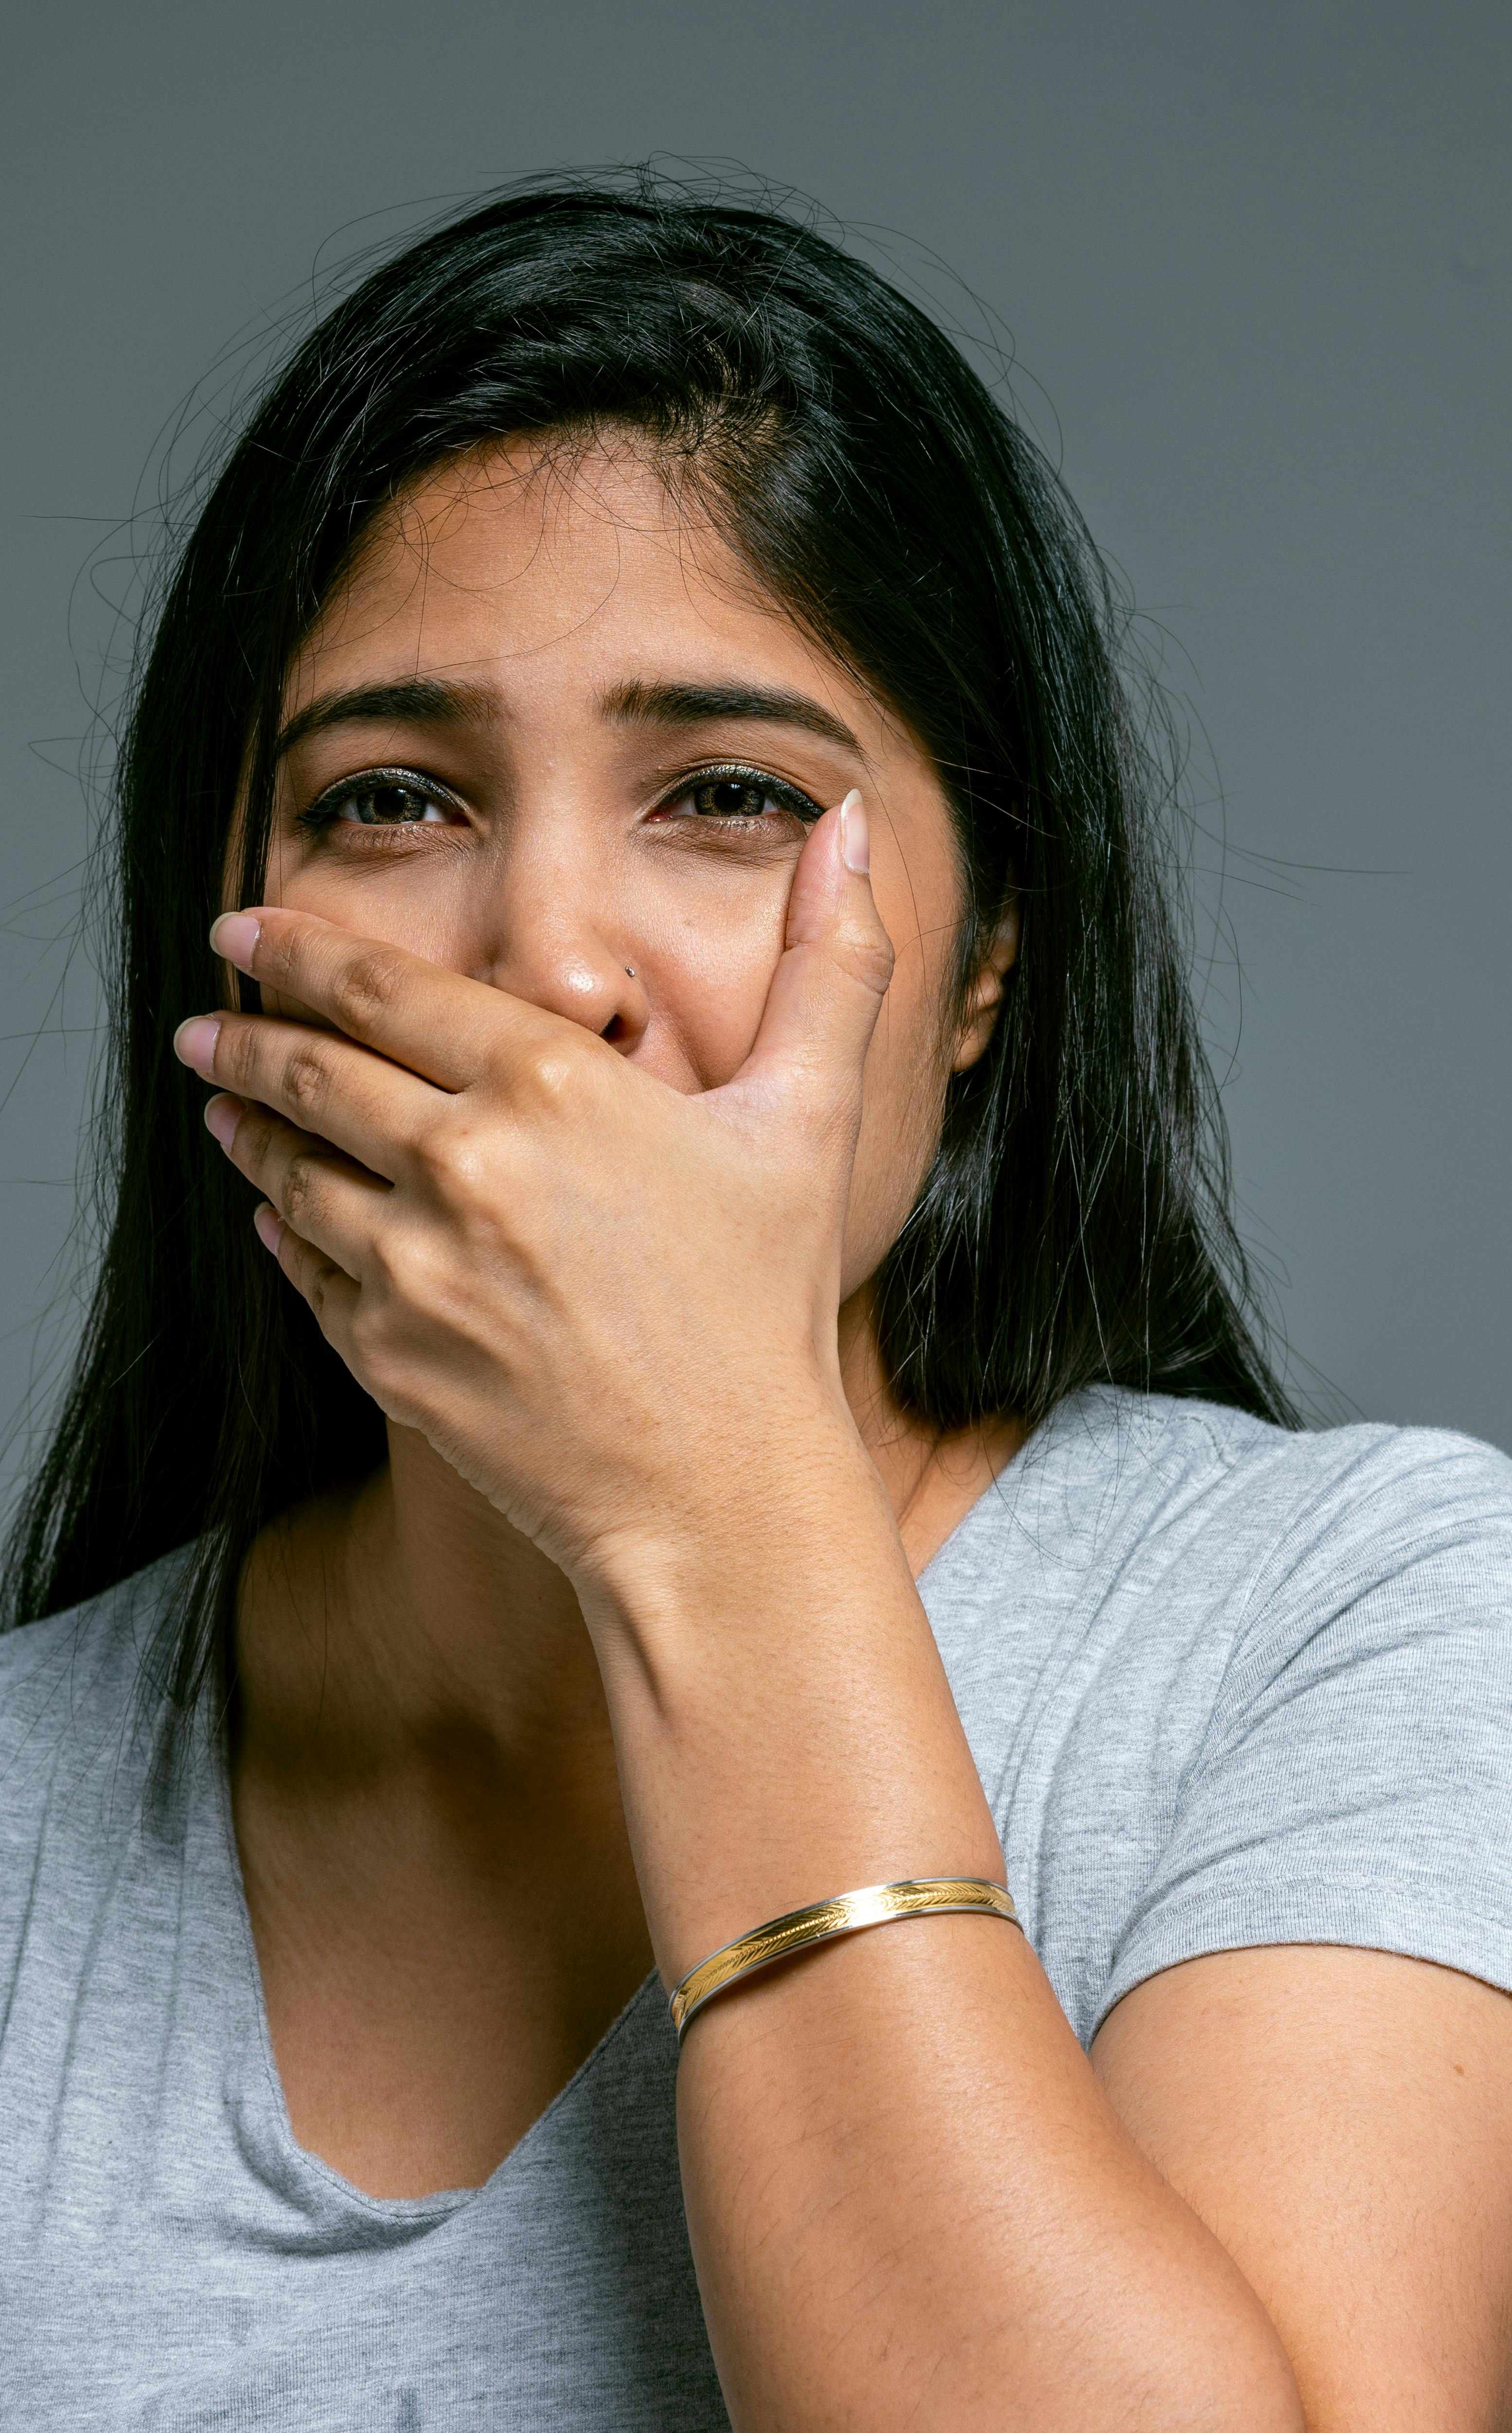 Shocked woman barely holds back tears | Source: Pexels